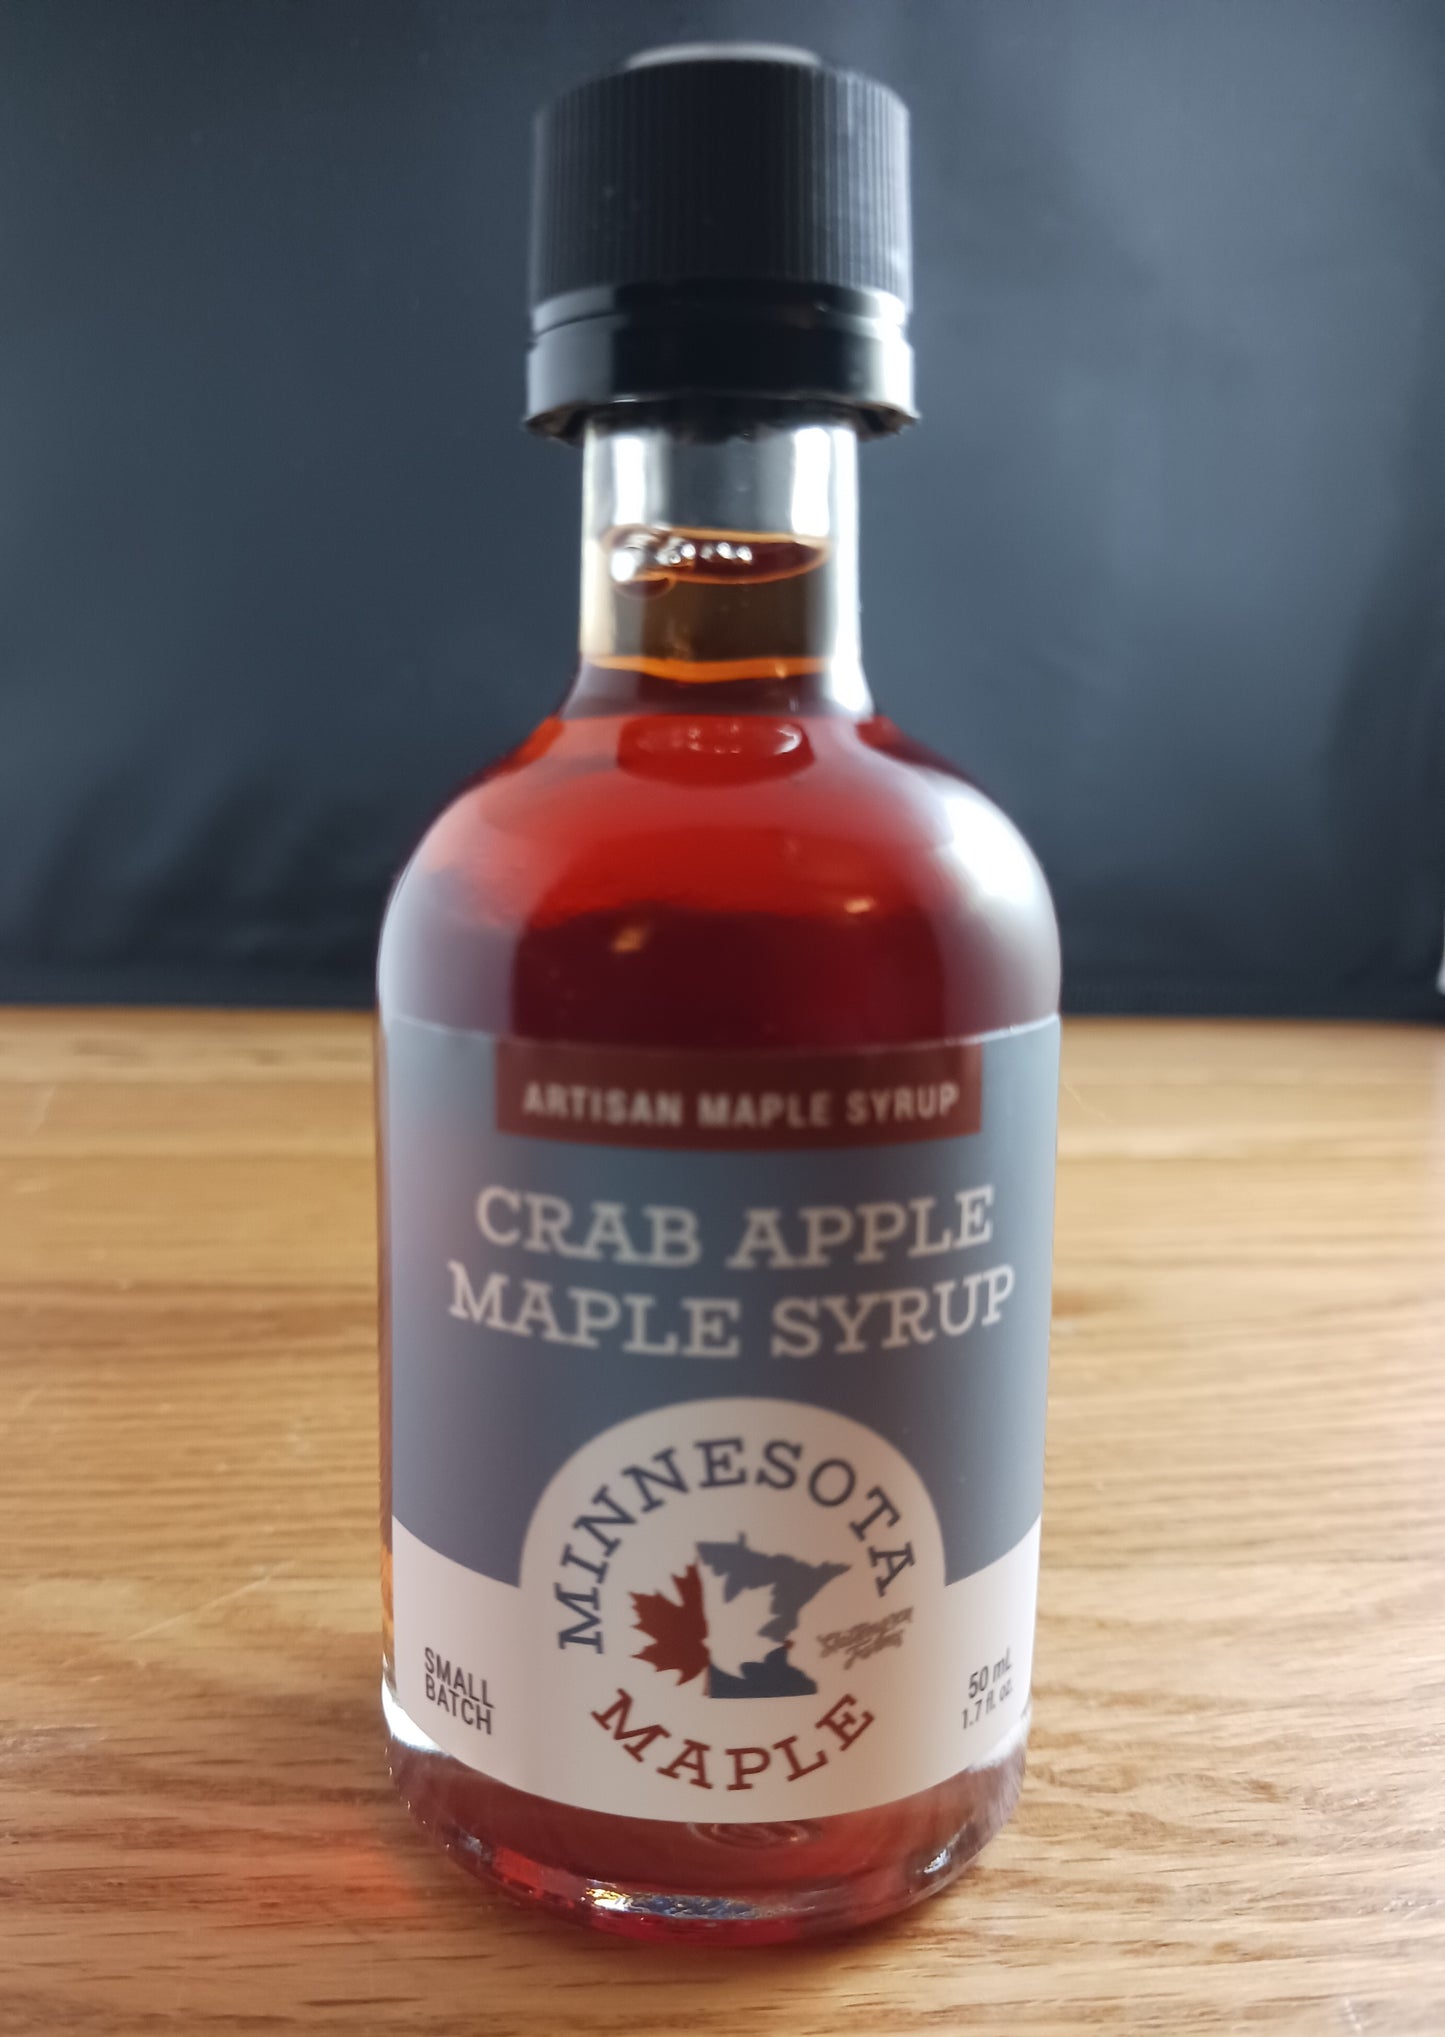 Crab Apple Maple Syrup